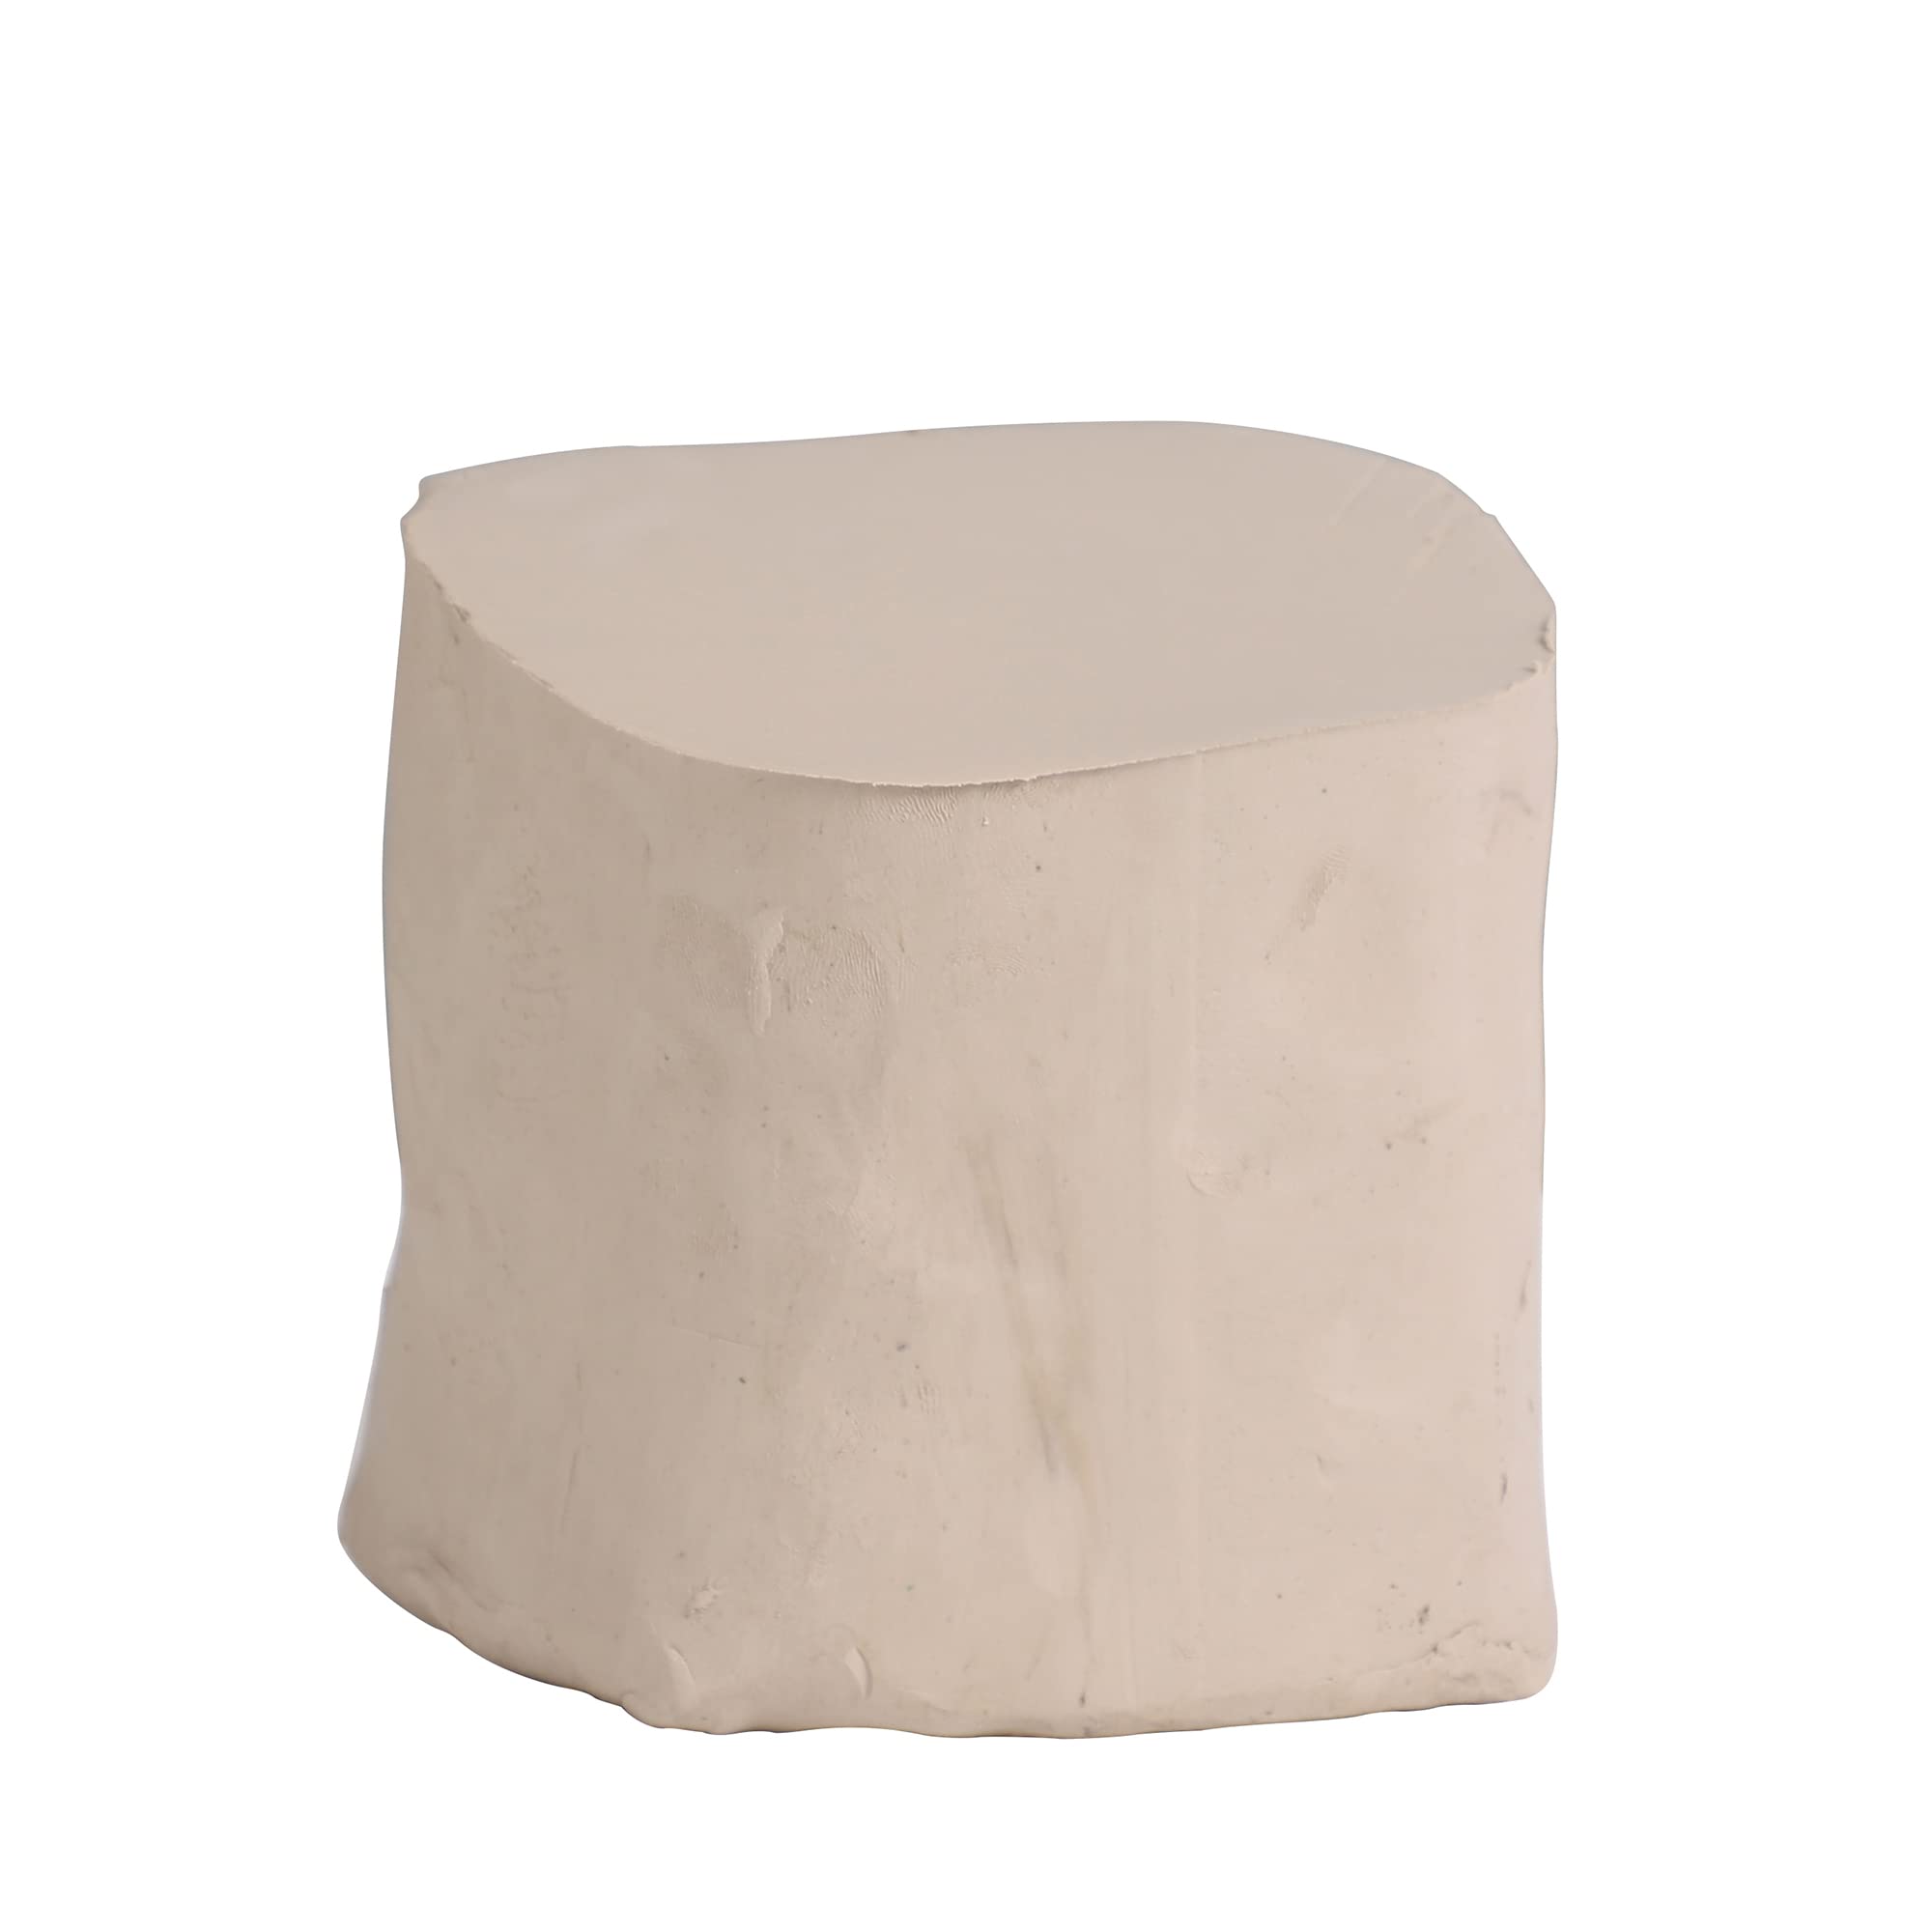 Deouss Mid High Fire White Stoneware Clay for Pottery Mid Fire Cone 5-7  Ideal for Wheel Throwing Hand Building Sculpting Great for All Skill Levels  Whiteware Clay- Pottery Clay Fires White 5 lbs